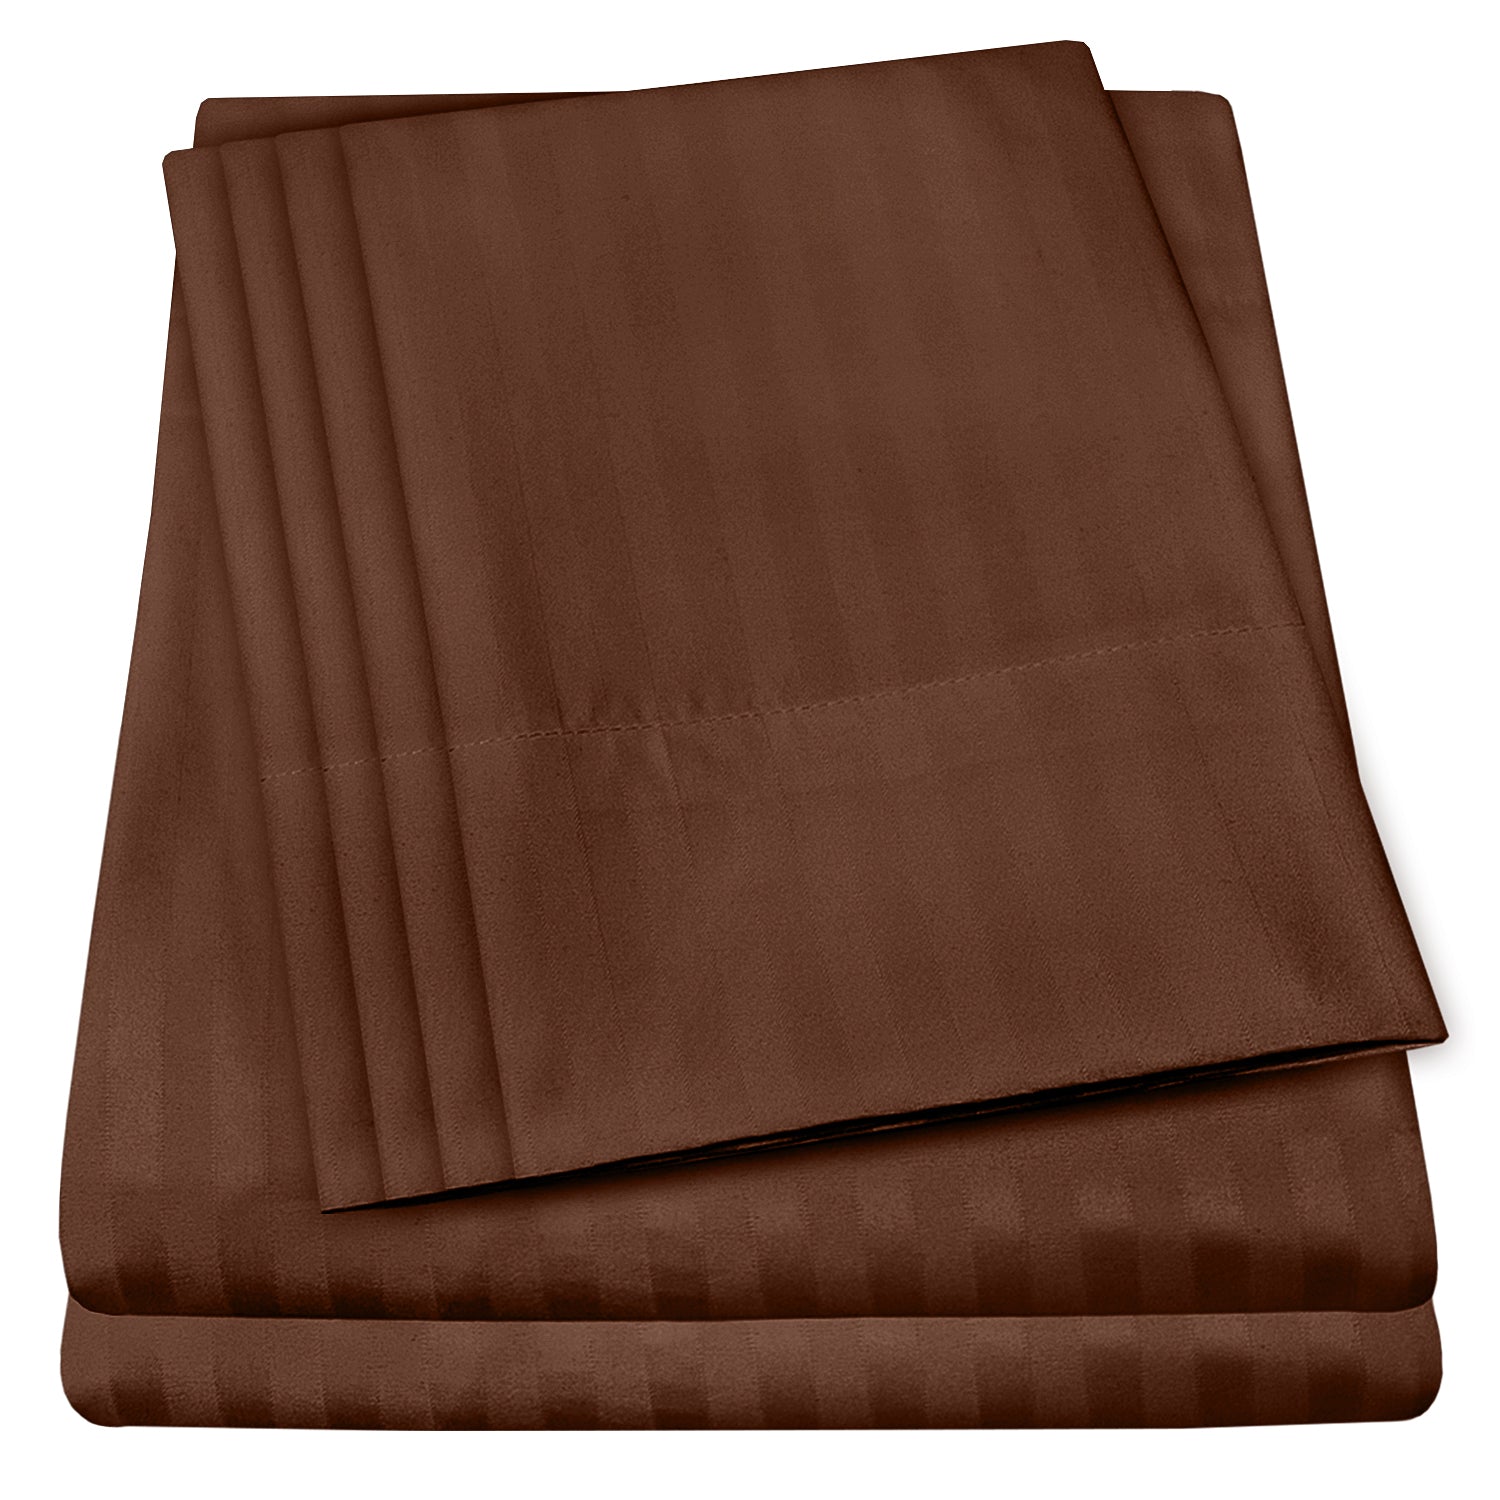 Deluxe 6-Piece Bed Sheet Set (Dobby Stripe Chocolate) - Folded